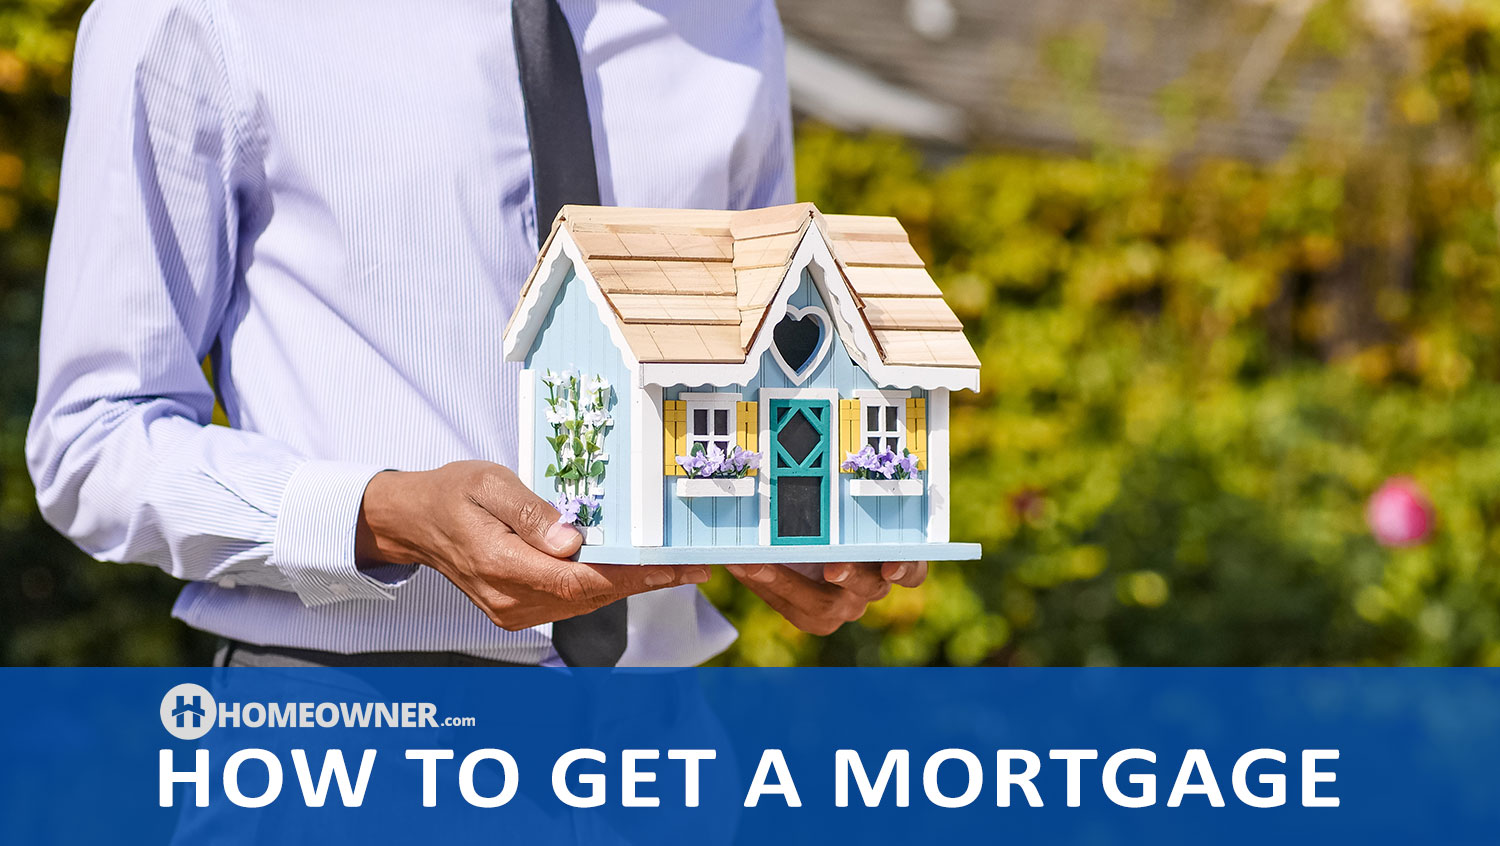 How To Get a Home Mortgage: Guide for First Time Home Buyers